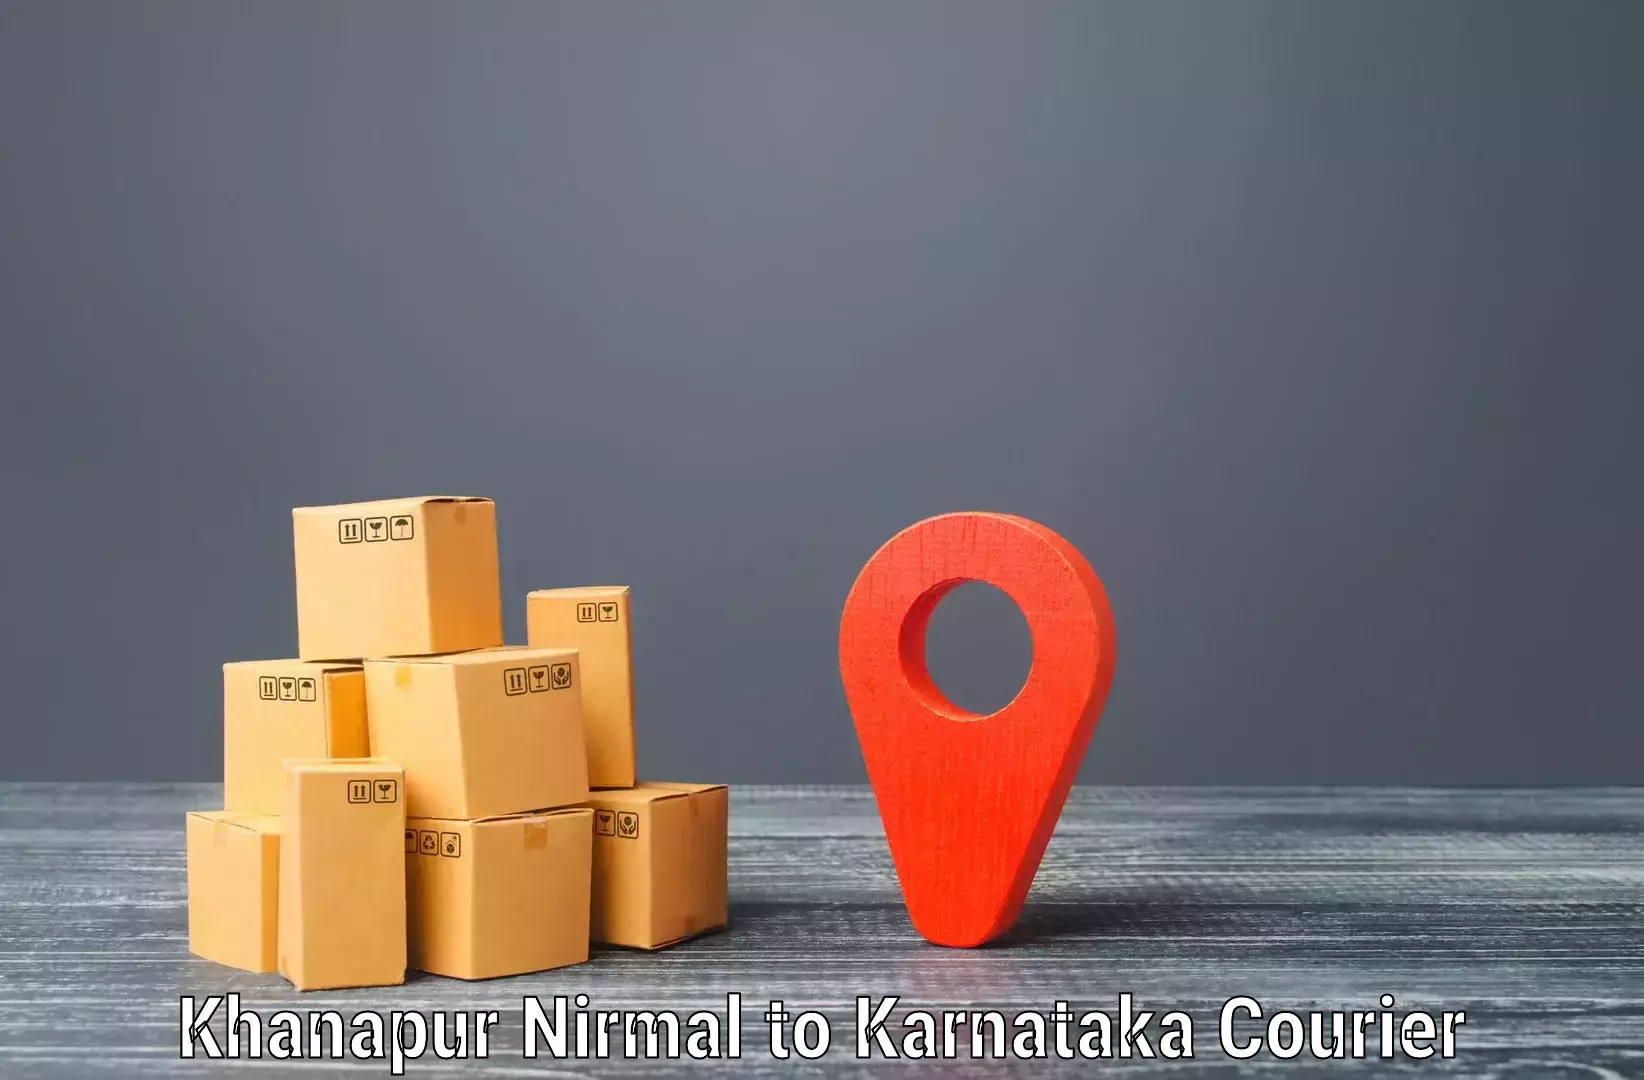 Reliable delivery network Khanapur Nirmal to Humnabad